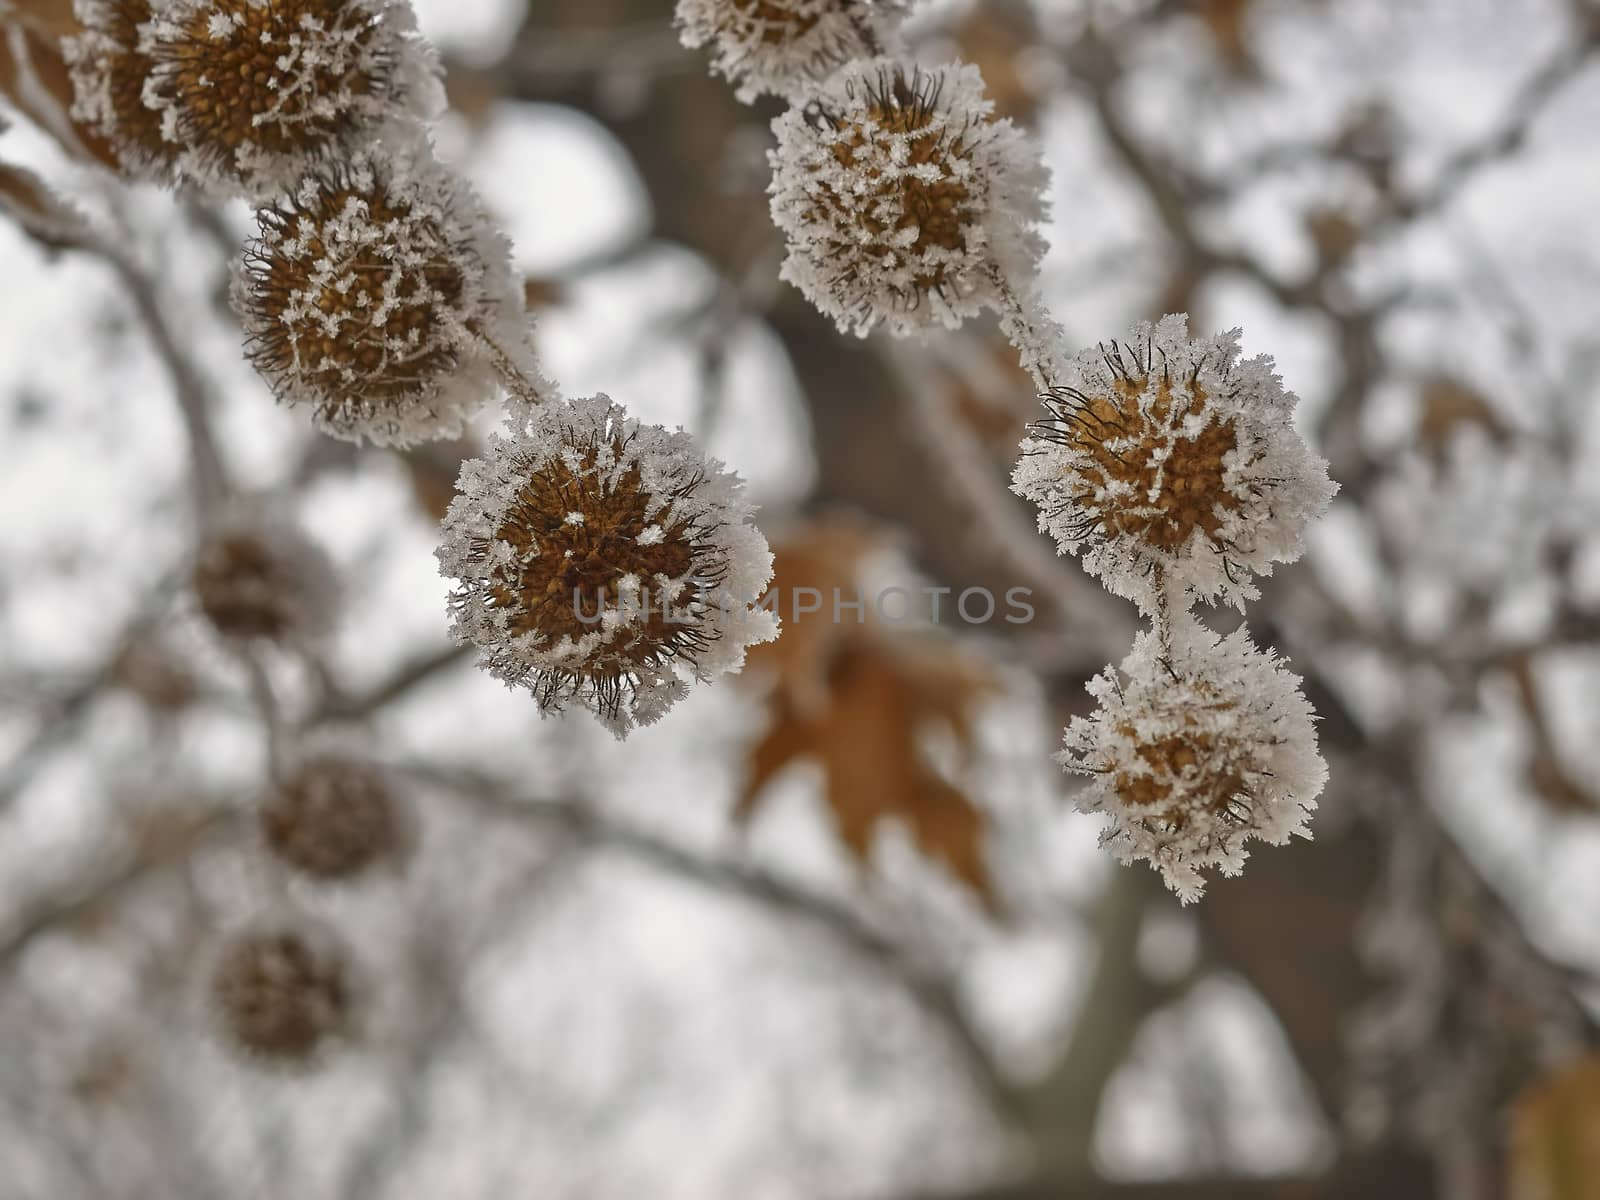 Rime coverered plane tree seed in park         